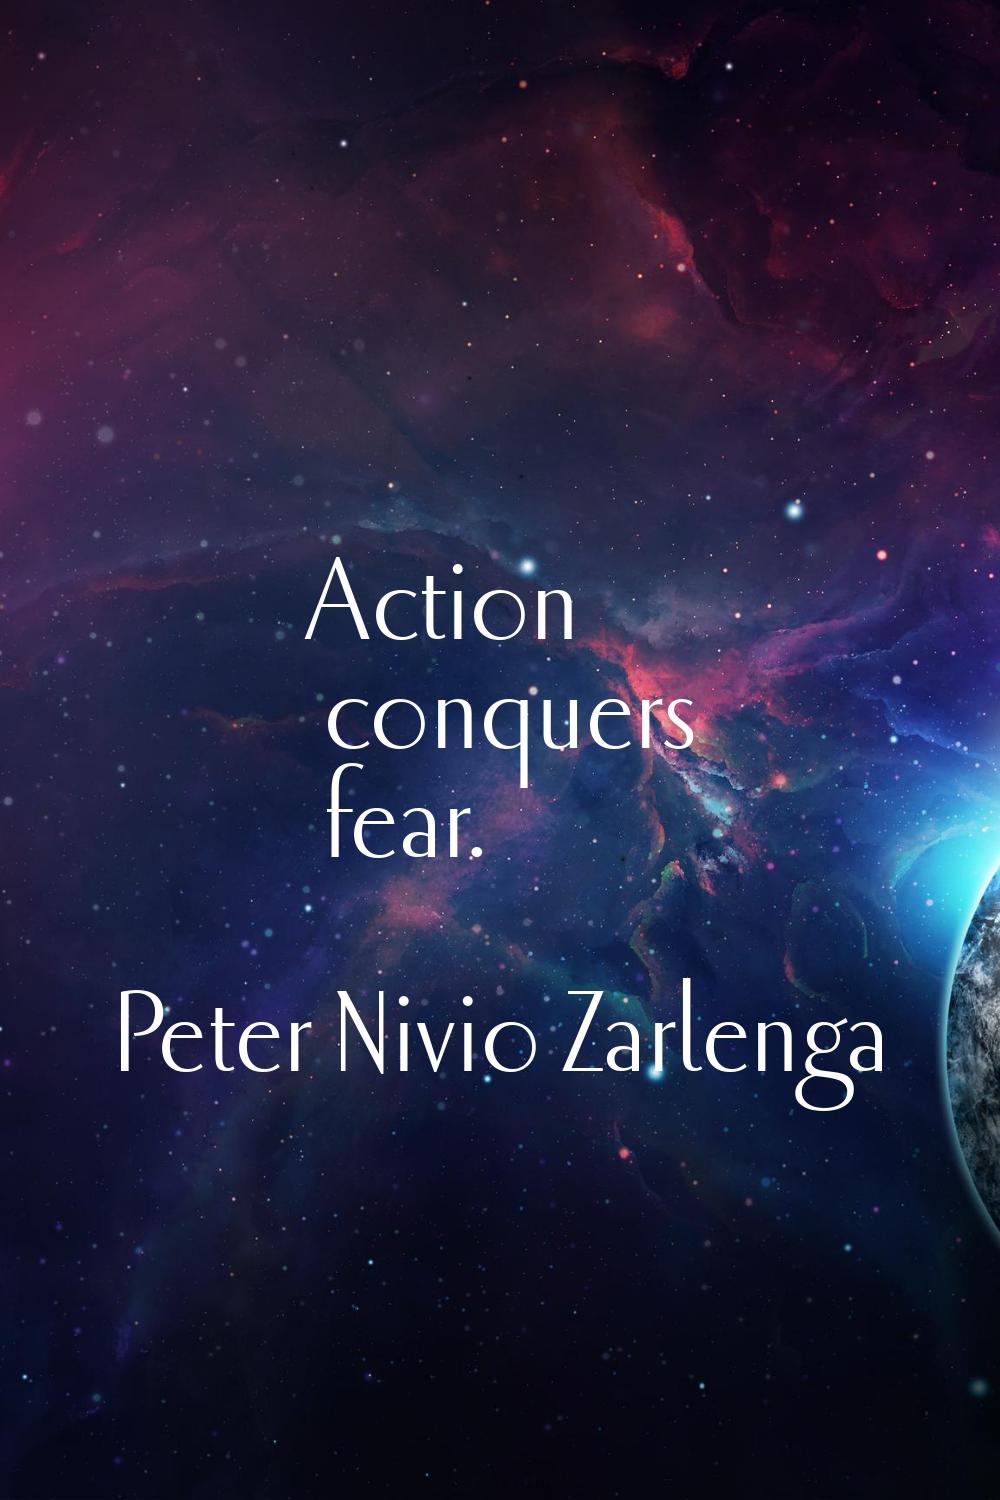 Action conquers fear.